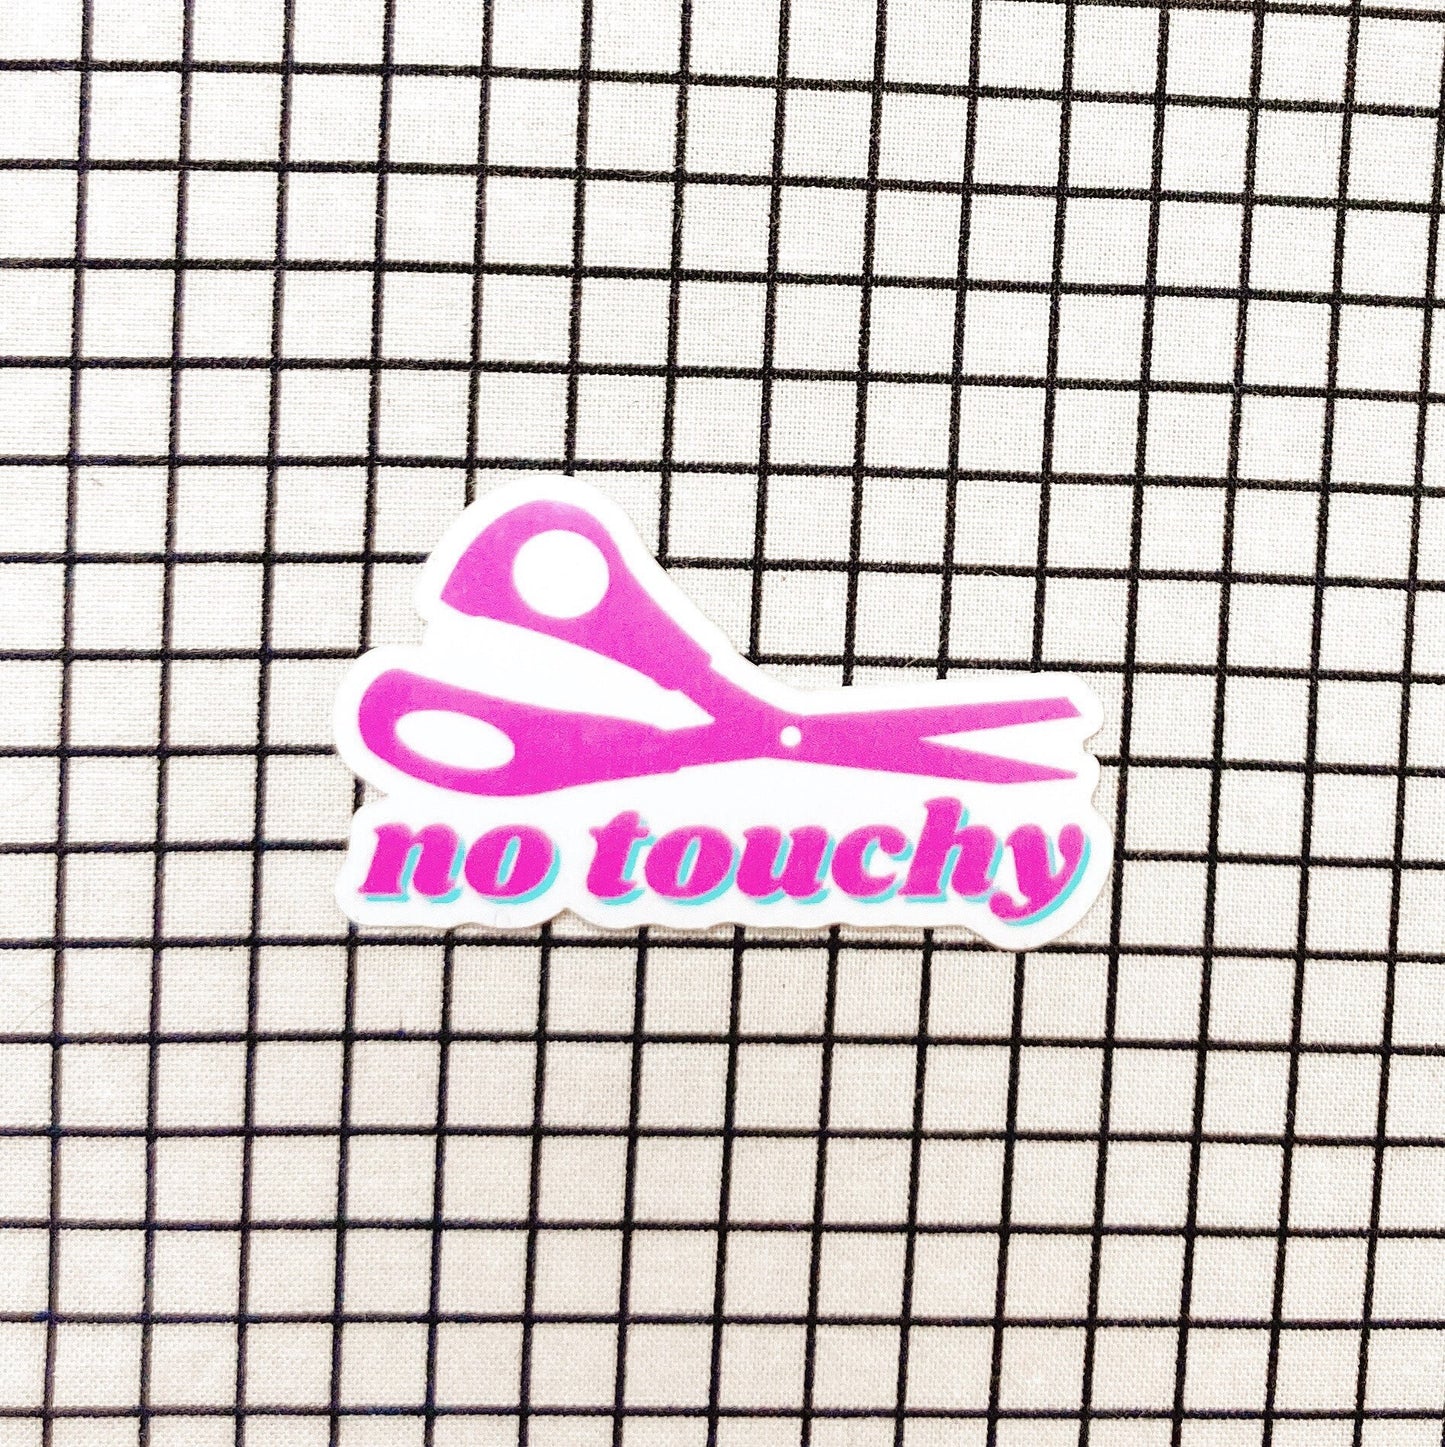 THICC sticker pack sewing and quilting vinyl holographic stickers